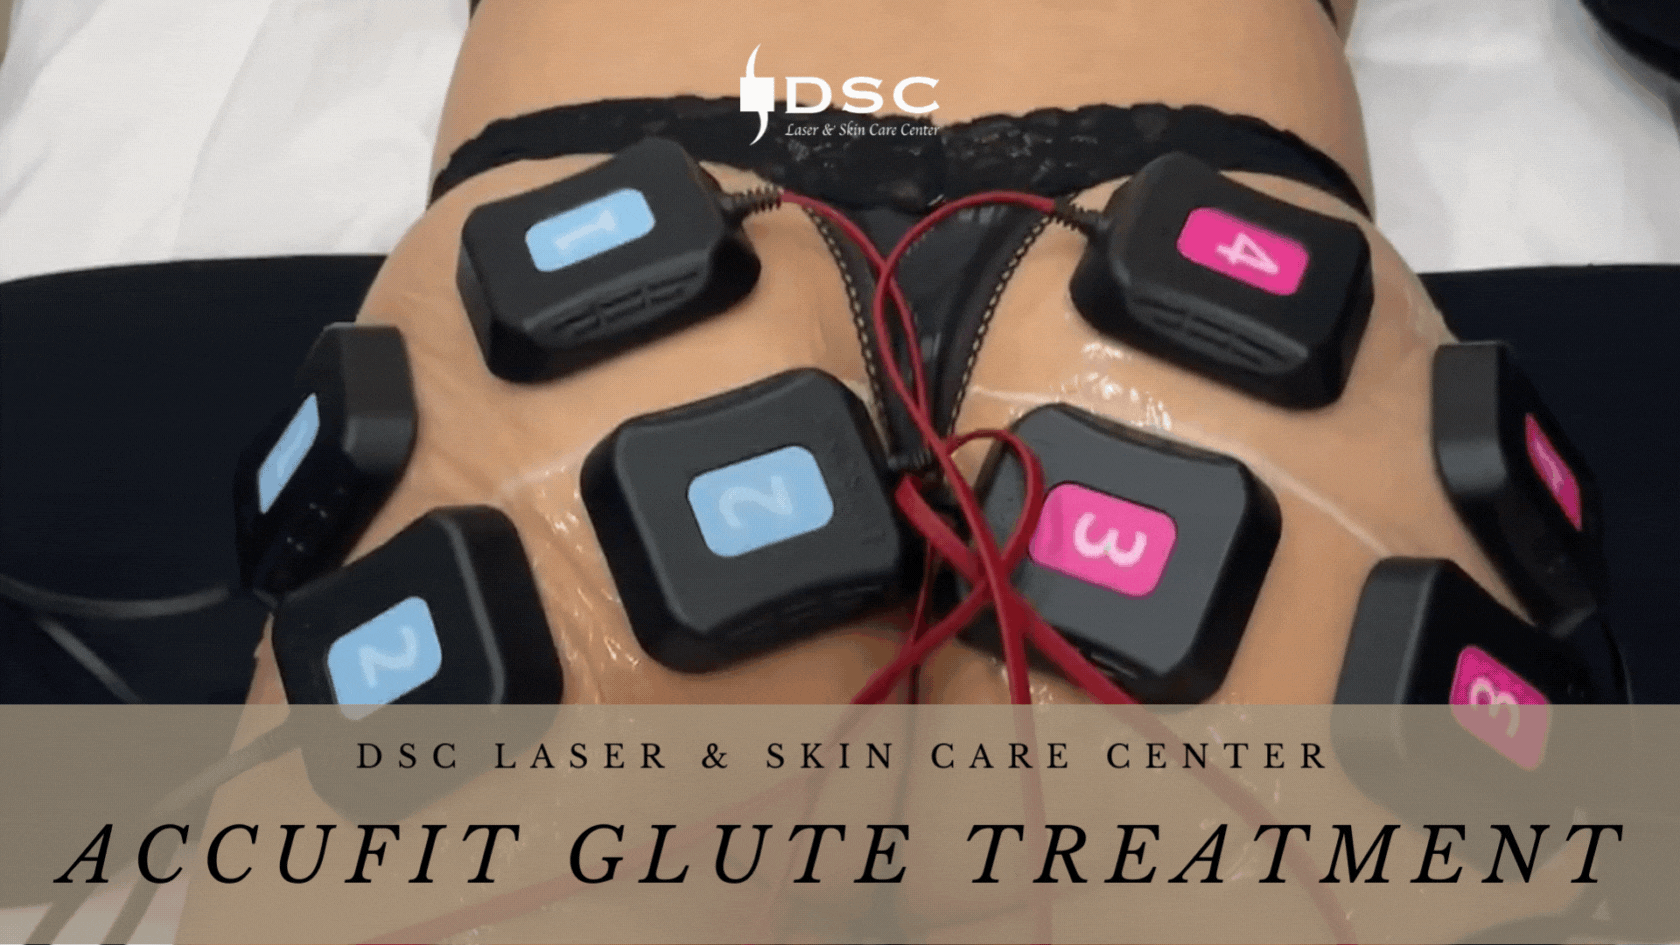 DSC Accufit treatment to glutes gif with Accufit contacts attached to glutes showing glute muscle contraction